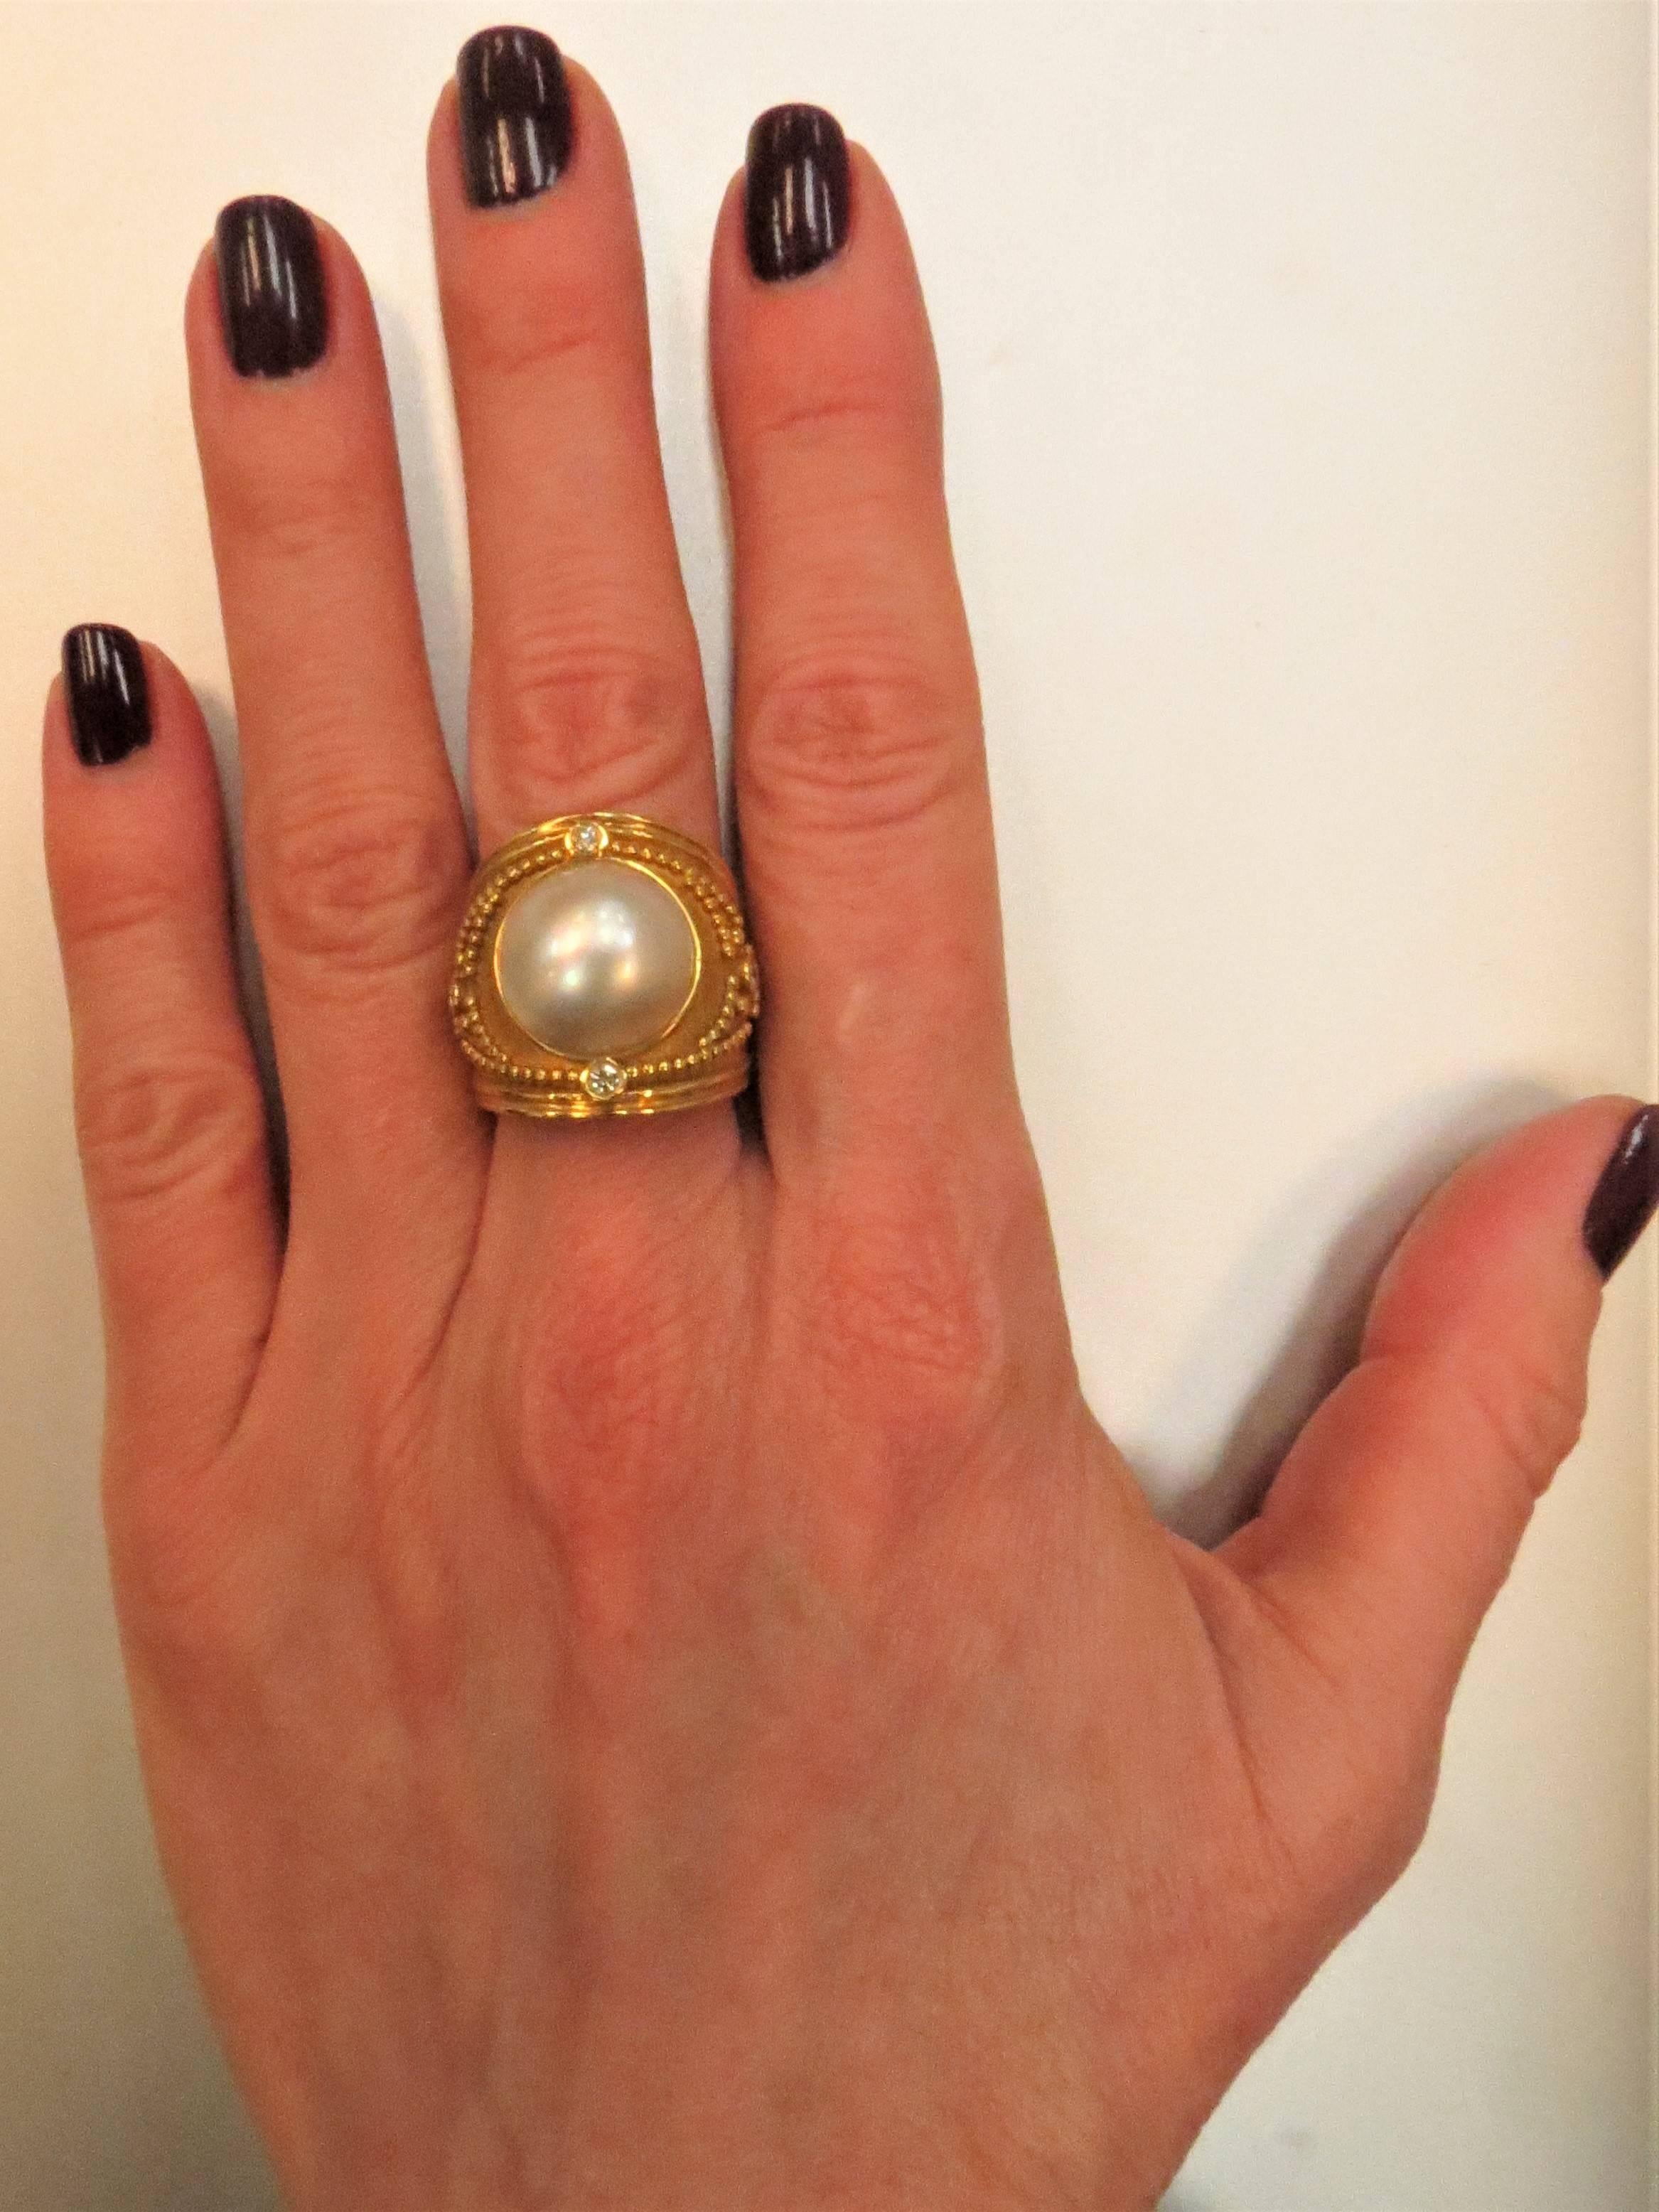 Fashionable 18K yellow gold ring, set in center with mabe pearl measuring 13mm and 4 bezel set full cut round diamonds weighing .18cts, G-H color, VS clarity.
Finger size 6. May be sized.